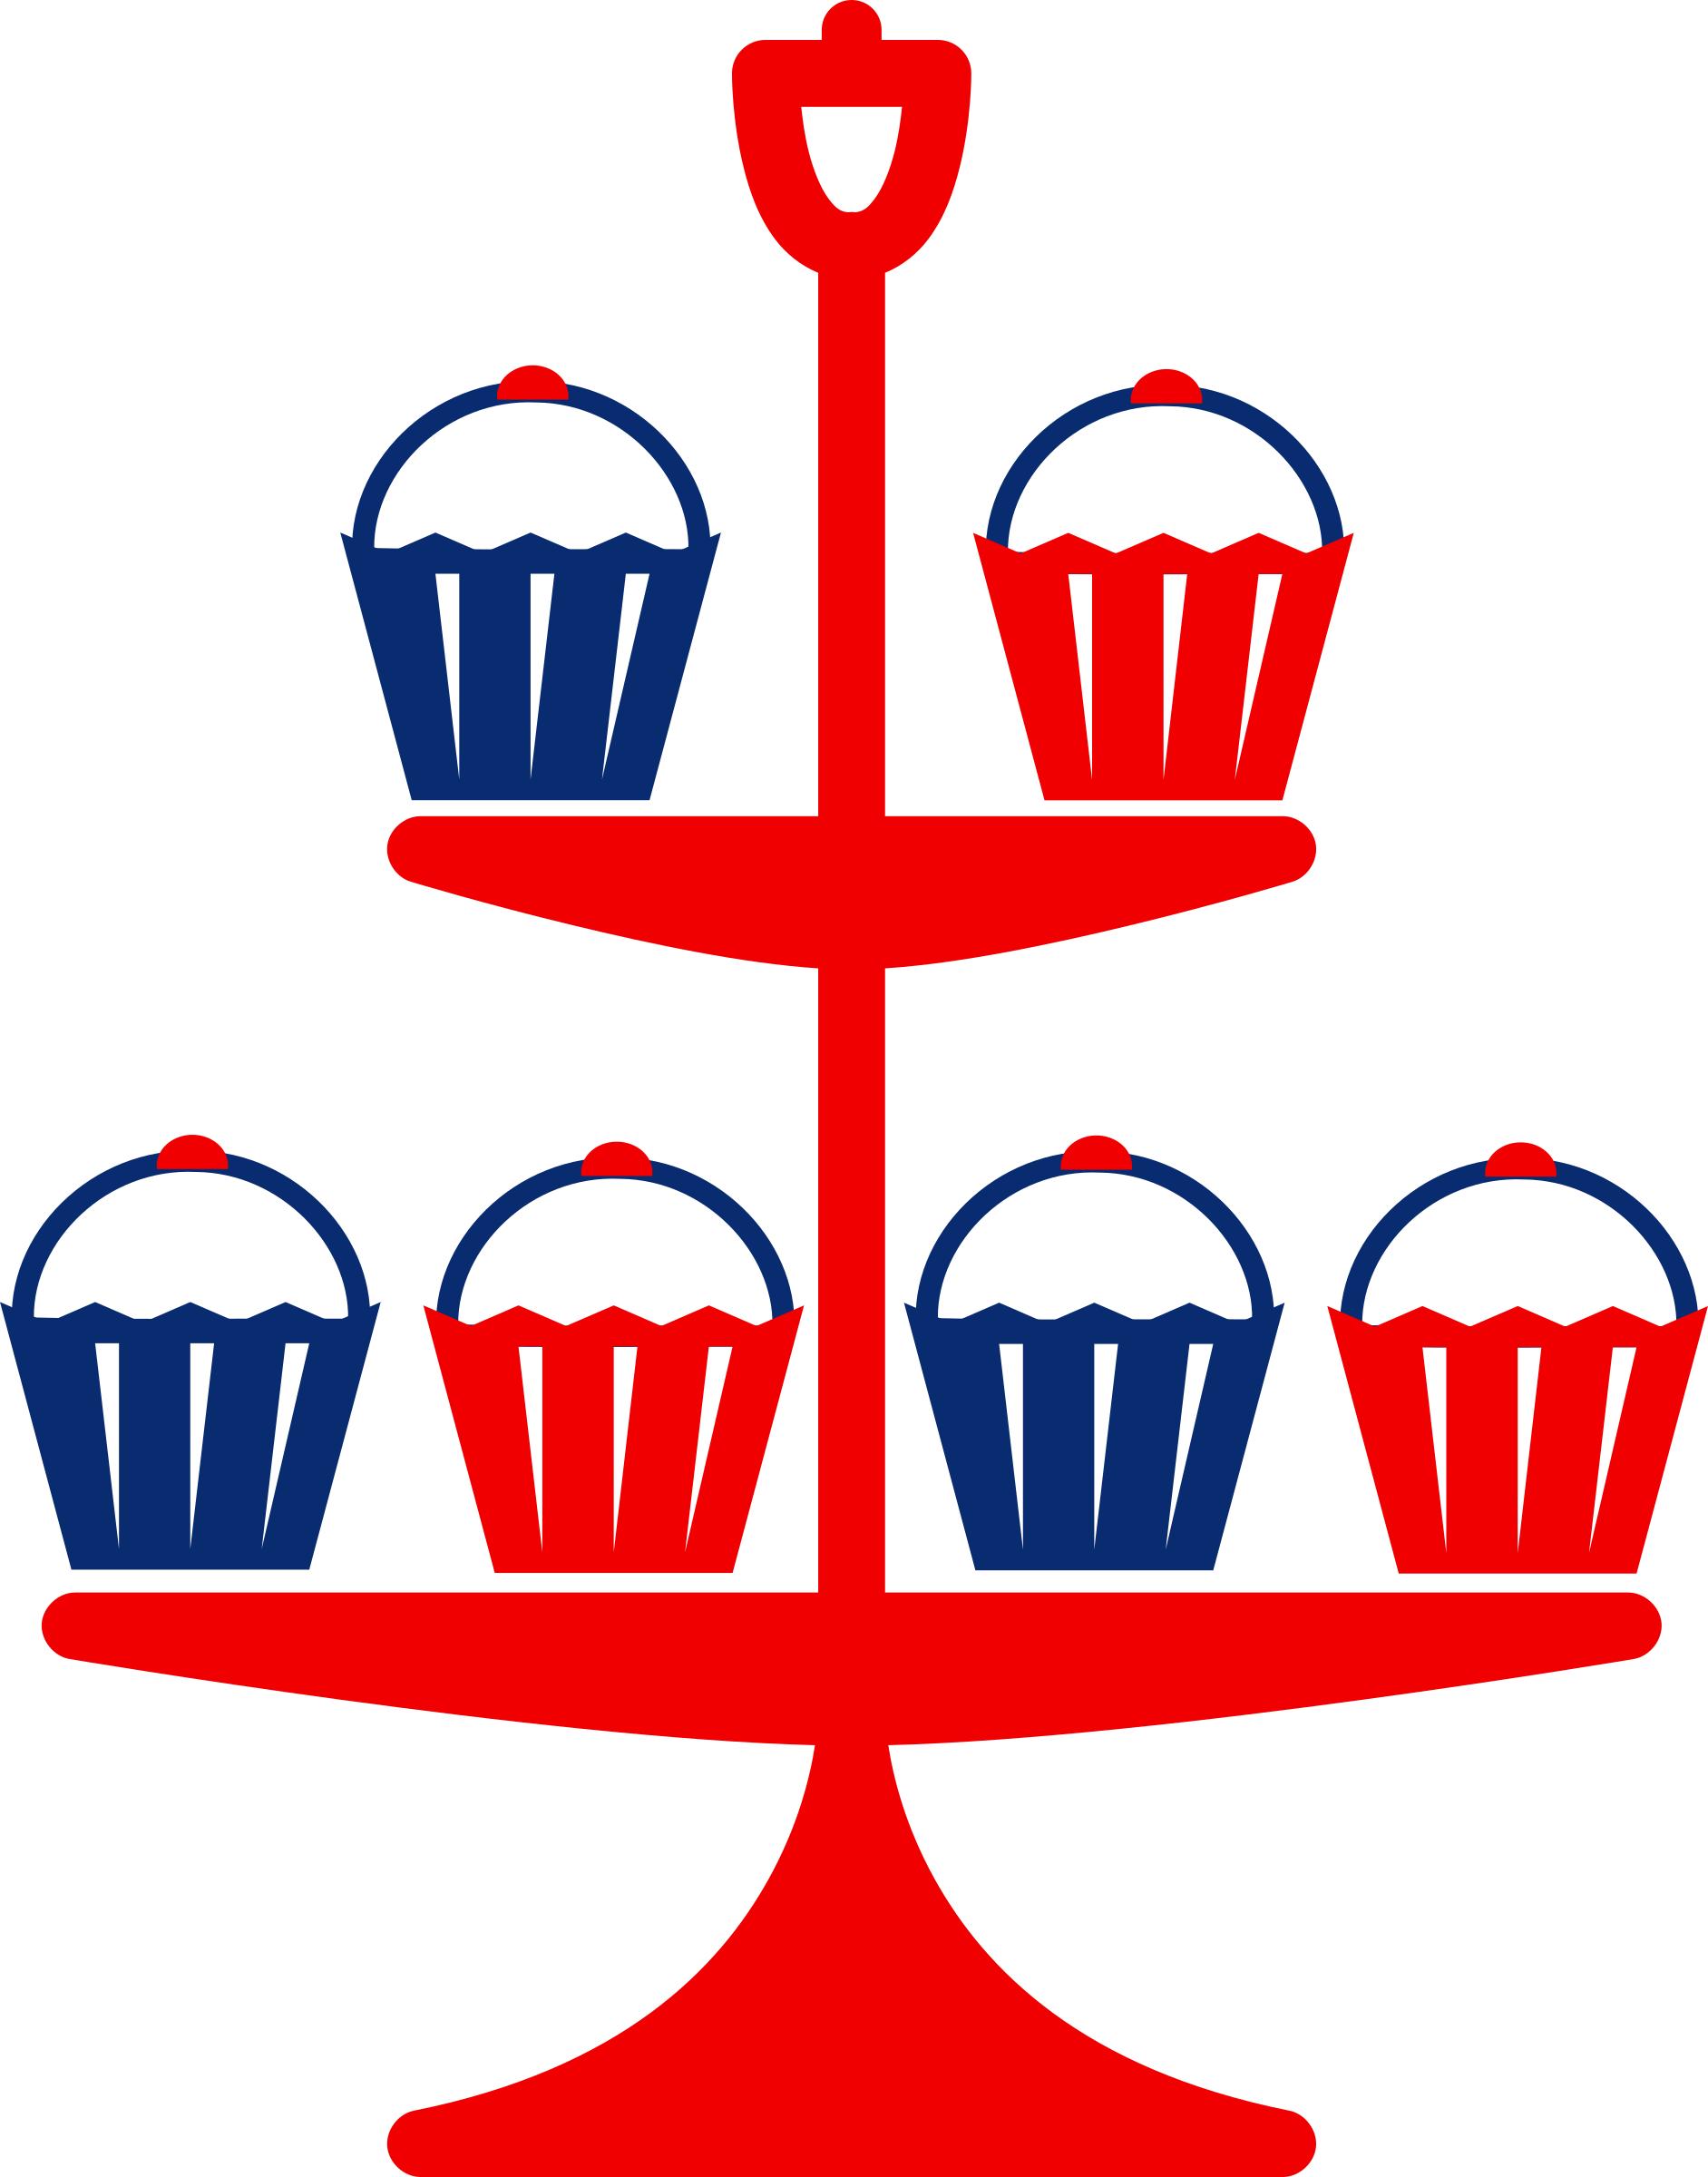 Jubilee cake stand red png